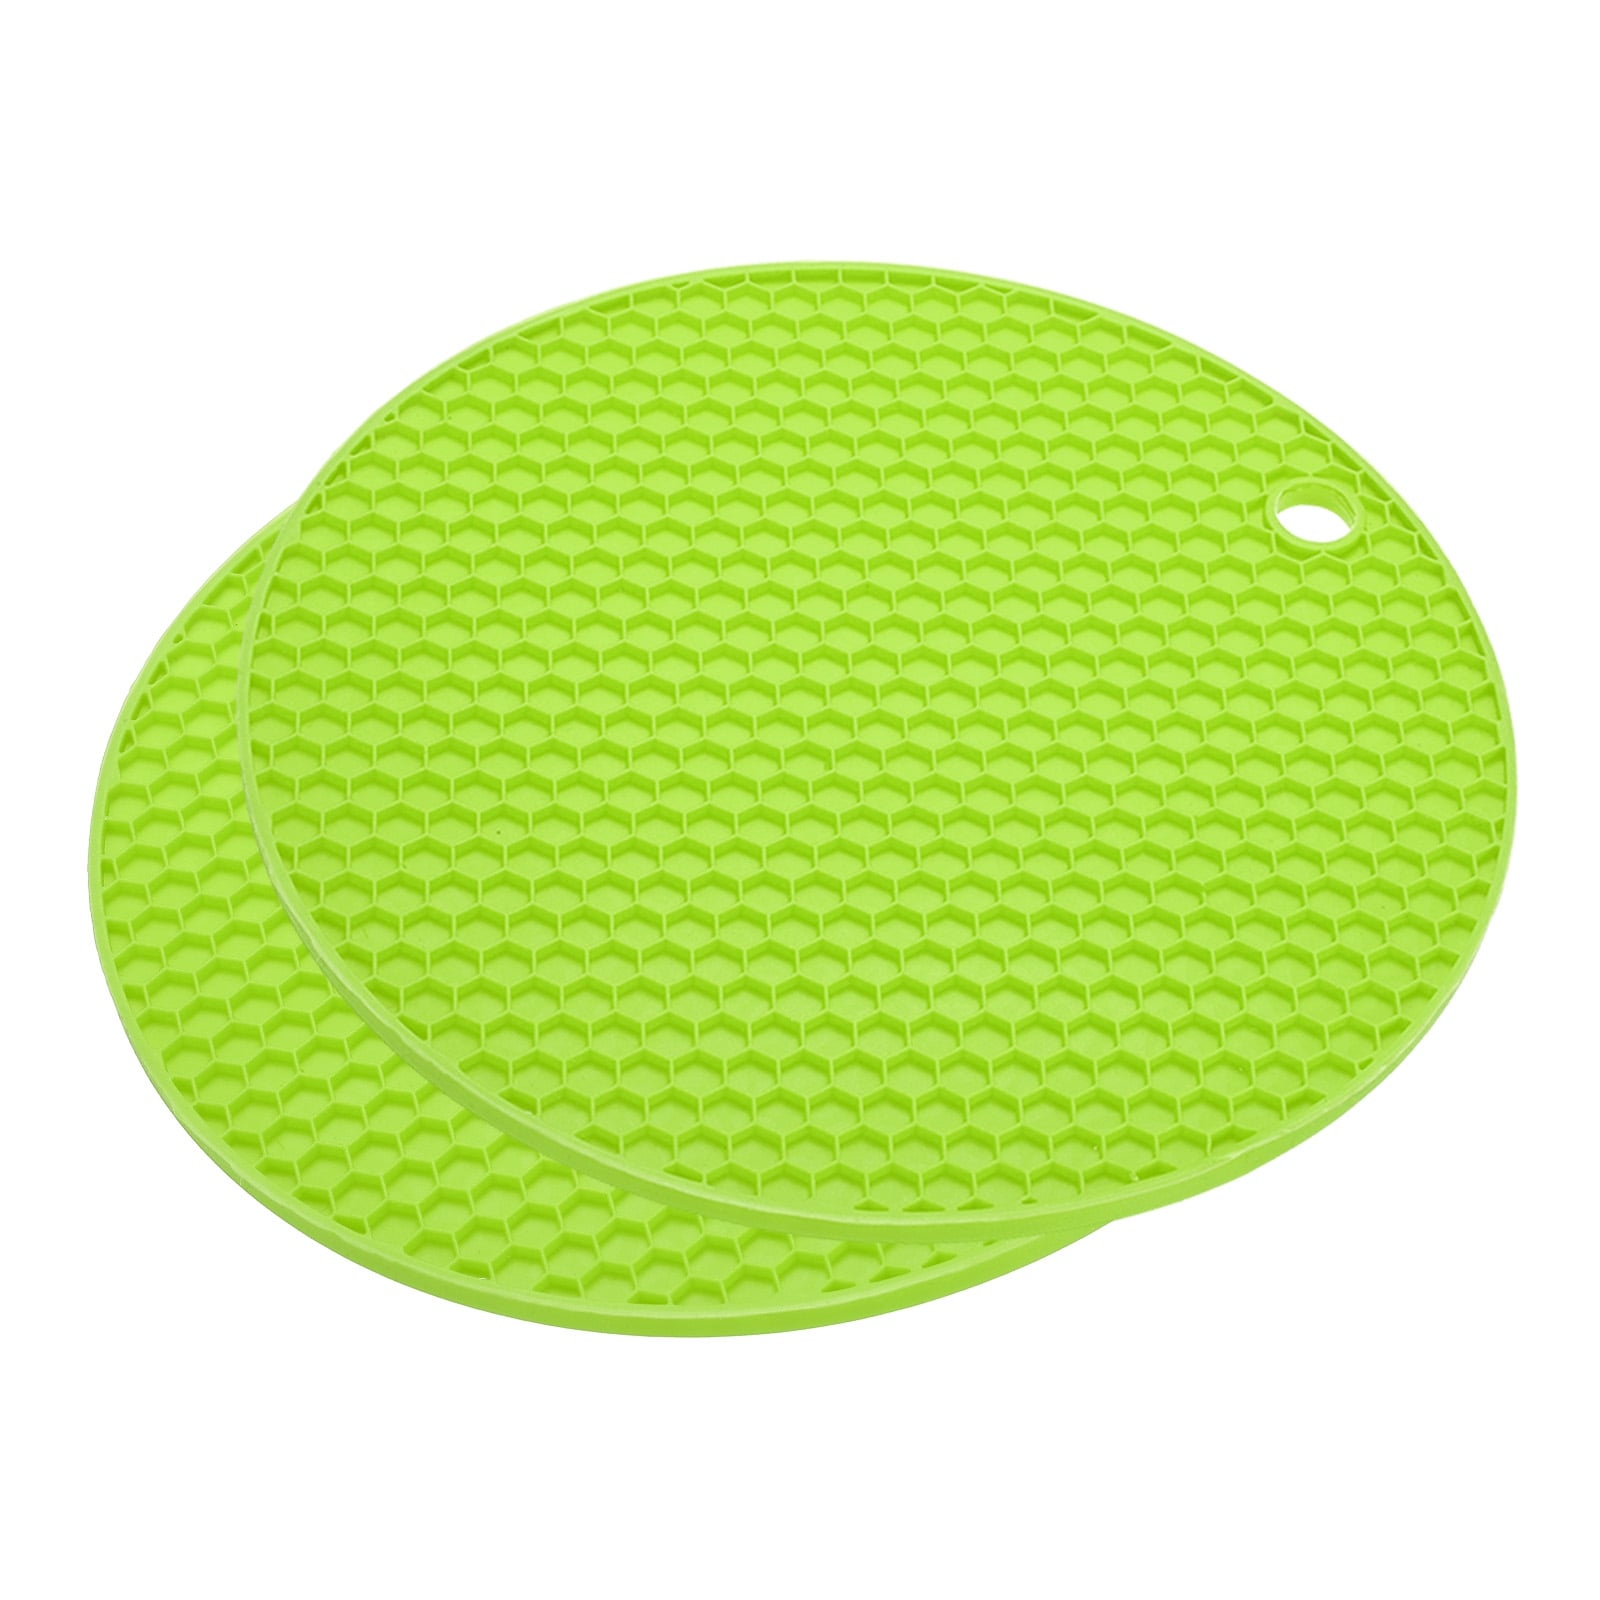 https://ak1.ostkcdn.com/images/products/is/images/direct/259cd3441dff67c5de5ed7cd29b6aaeaeaa9ef1a/Silicone-Trivet-Mats-2pcs%2C-Round-Hot-Pan-Pads-Honeycomb-Drying-Mat---Green.jpg